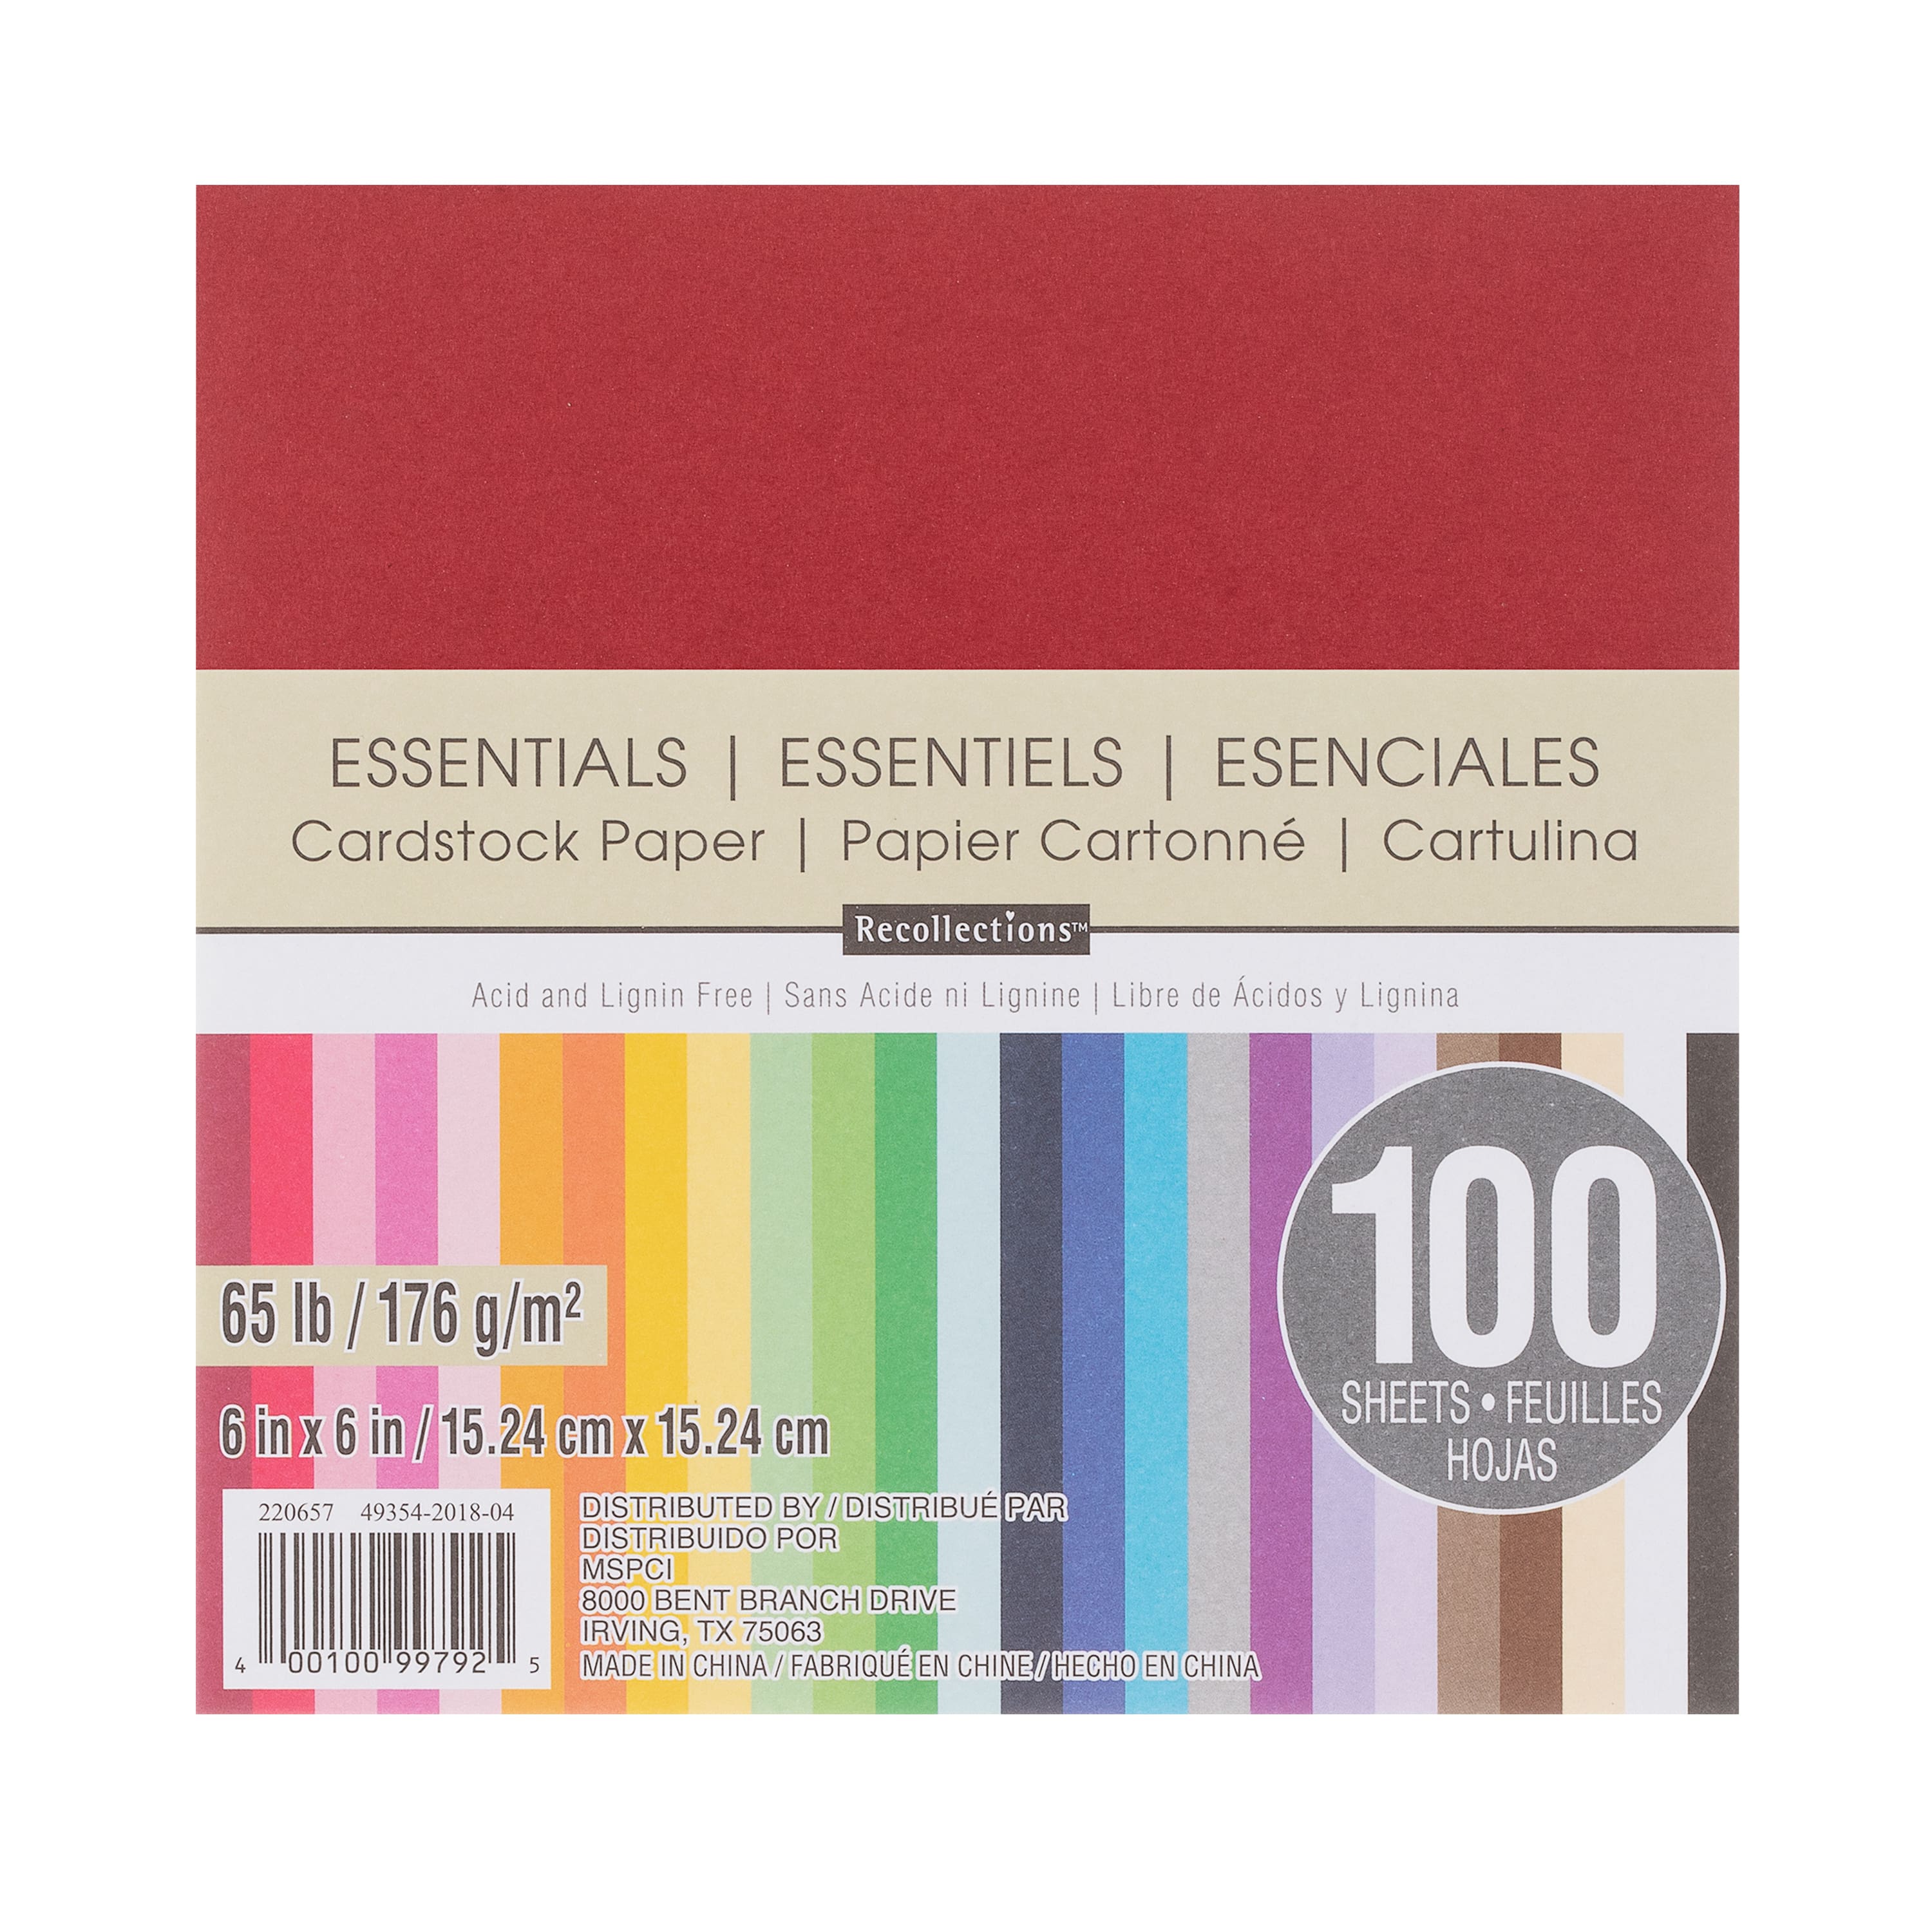 Kraft 4.5 x 6.5 Cardstock Paper by Recollections™, 100 Sheets